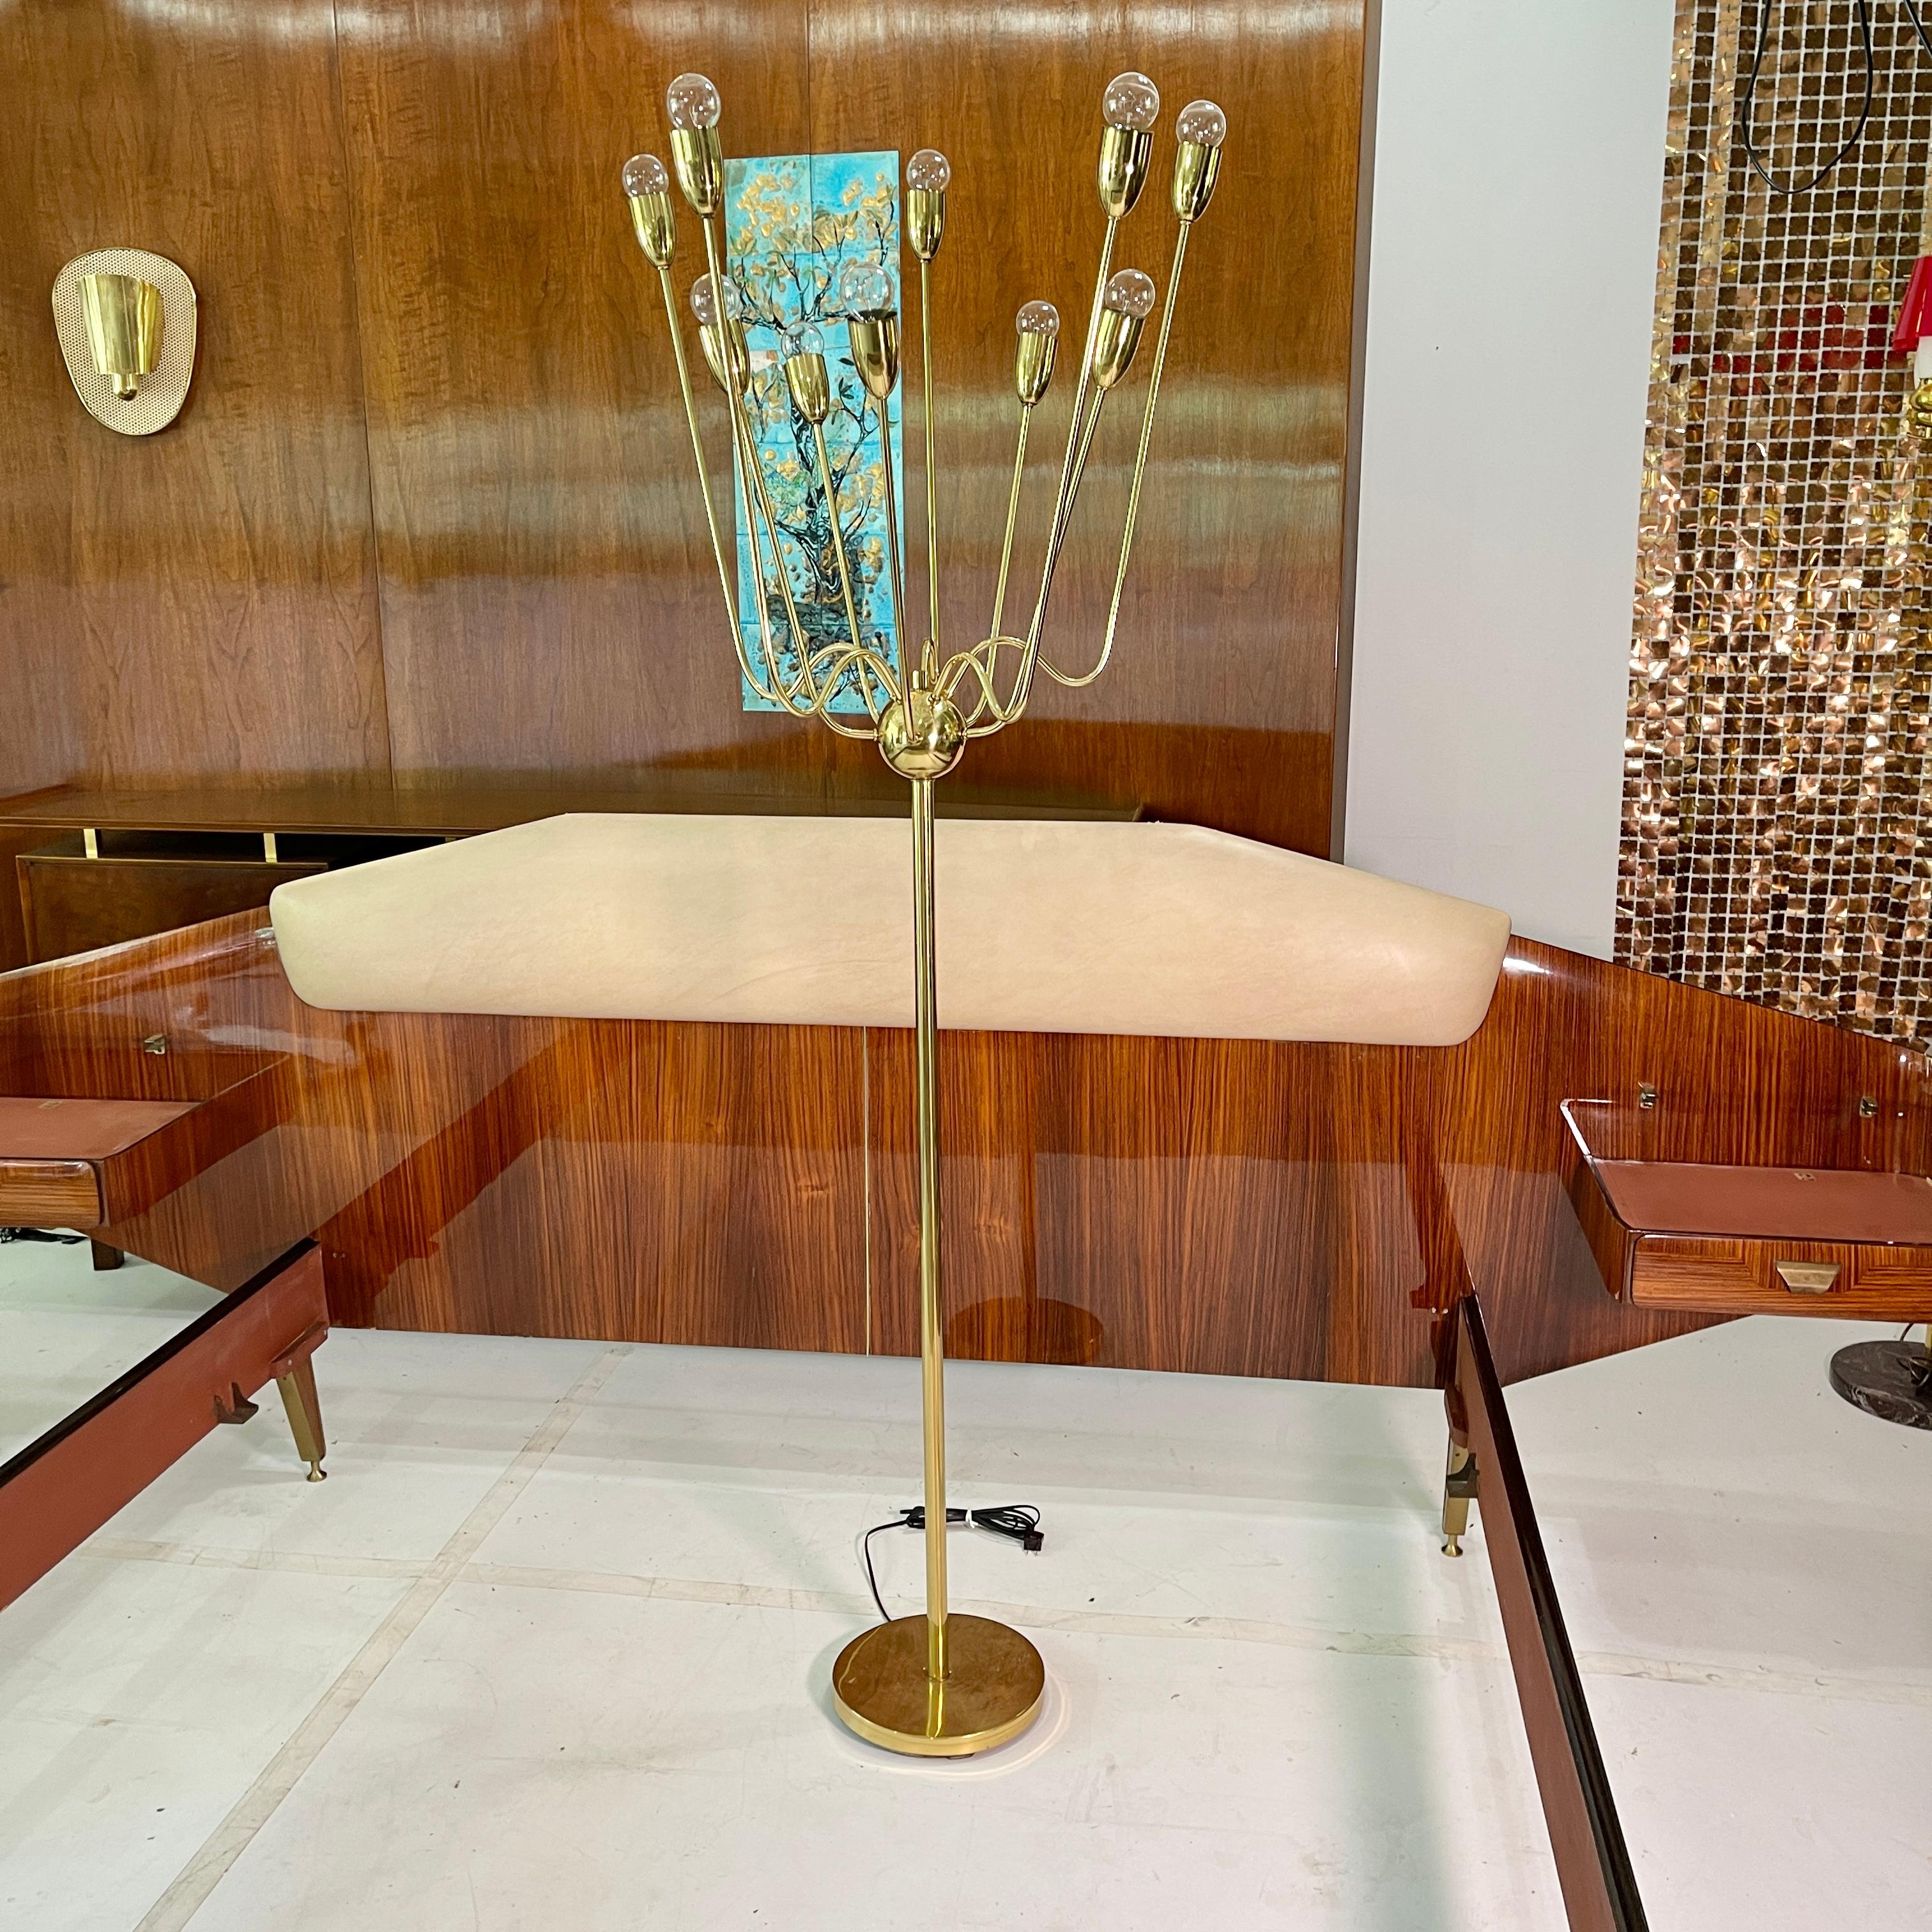 1960's Brass Sputnik Floor Lamp In Good Condition For Sale In Hanover, MA